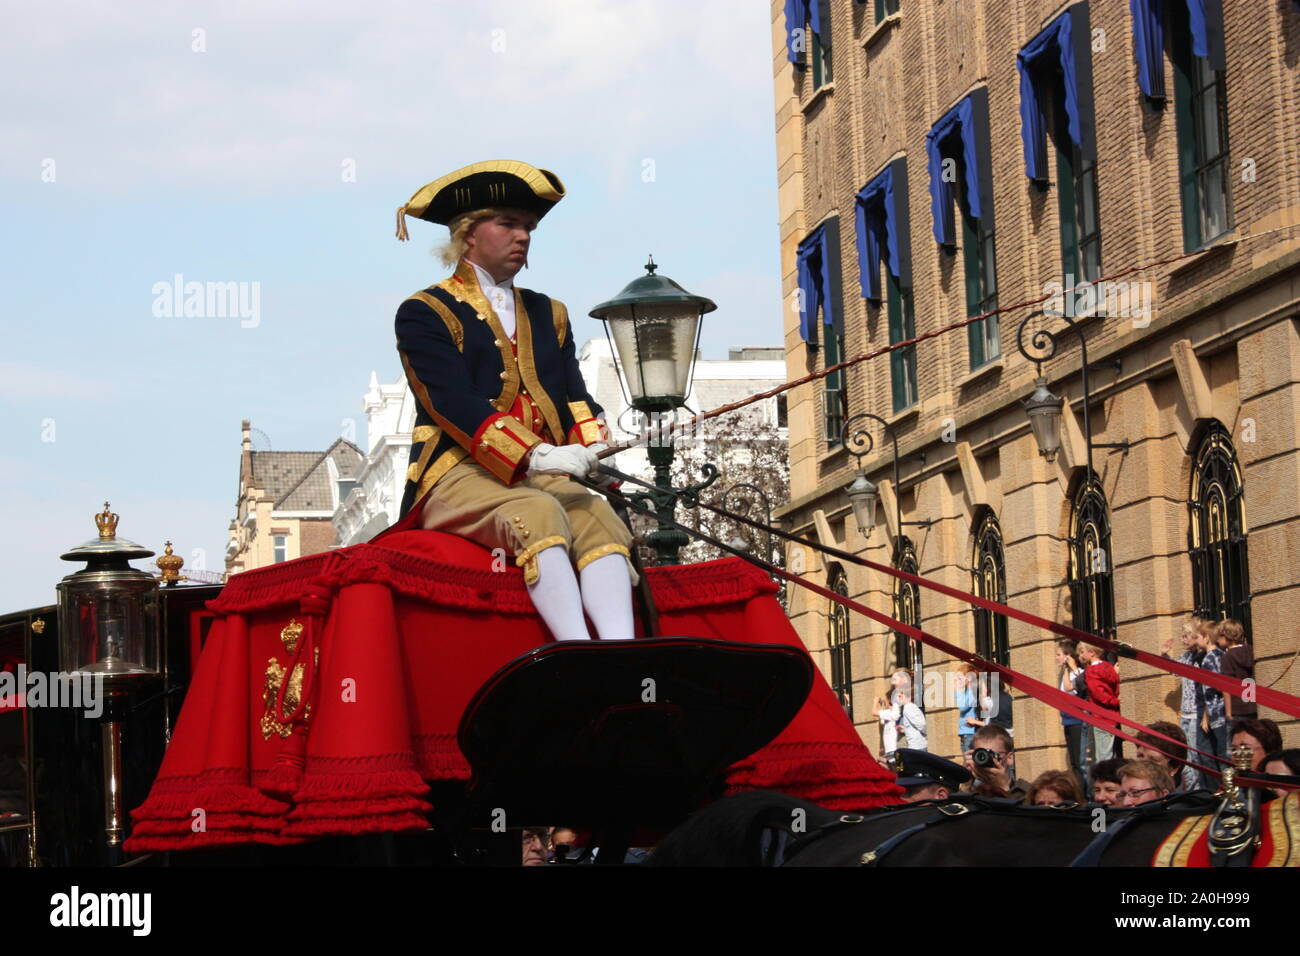 The driver rode on the golden carriage with the Royal family on the way to the Hall of Knights in The Hague at Prinsjesdag annual ceremony. Stock Photo